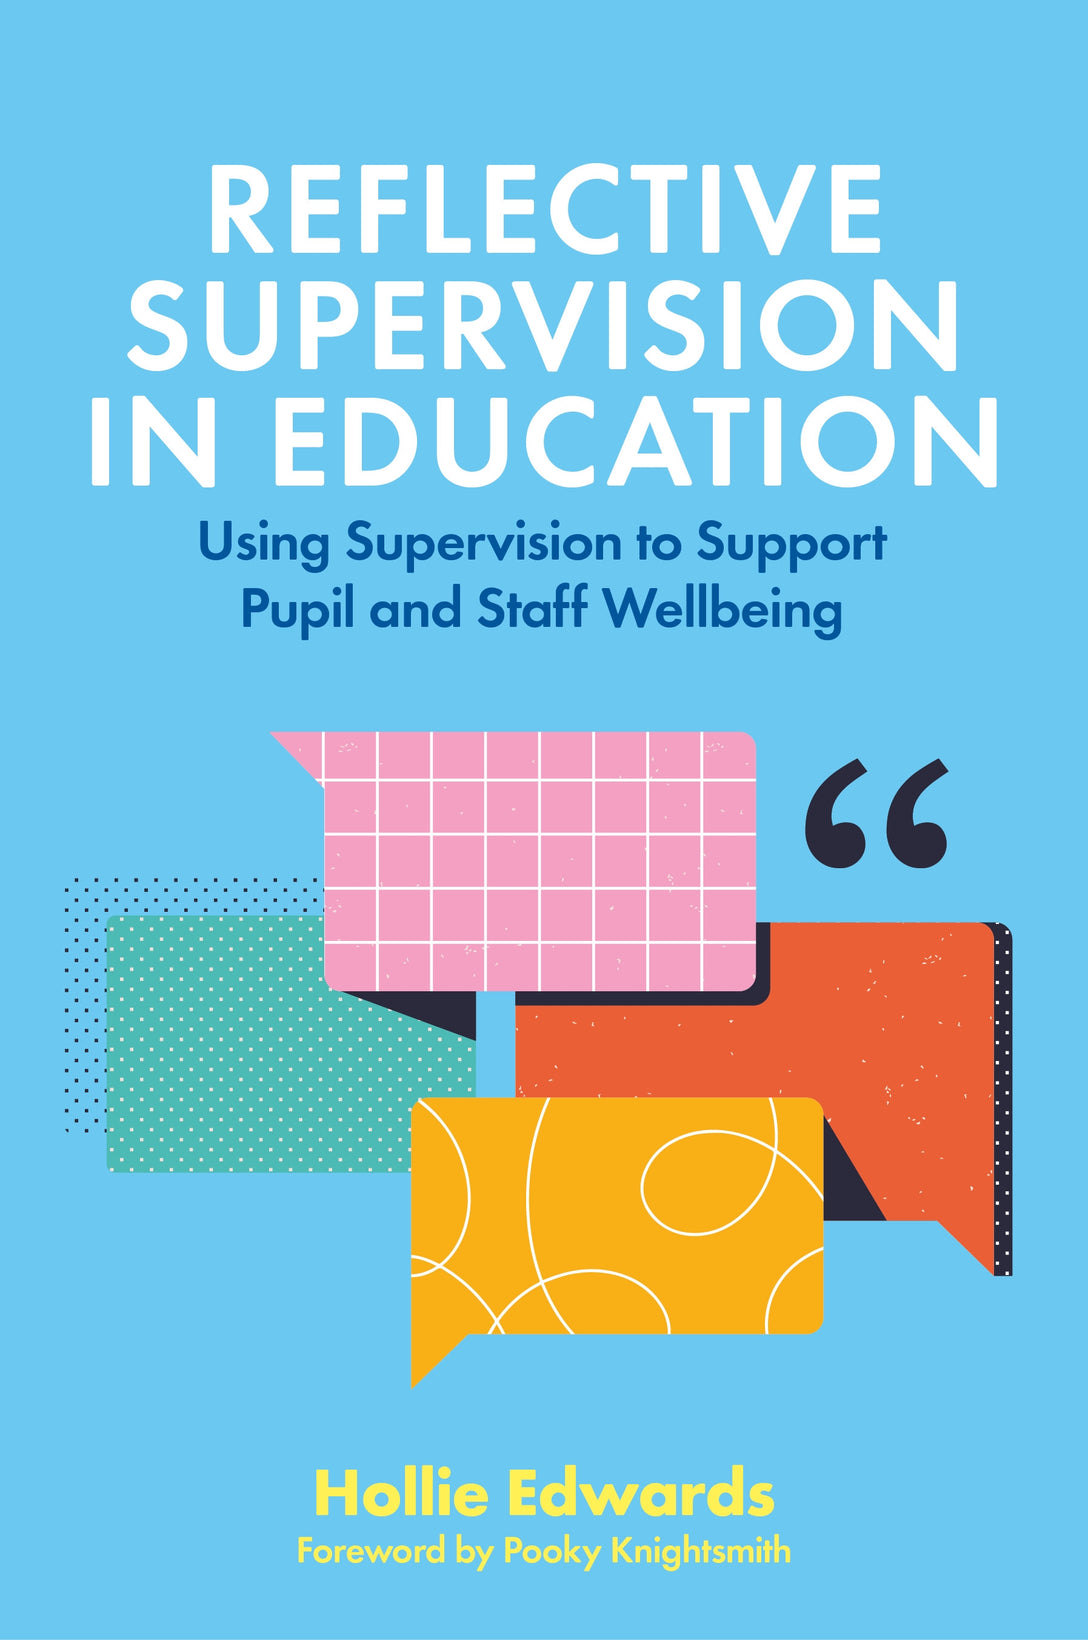 Reflective Supervision in Education by Hollie Edwards, Pooky Knightsmith